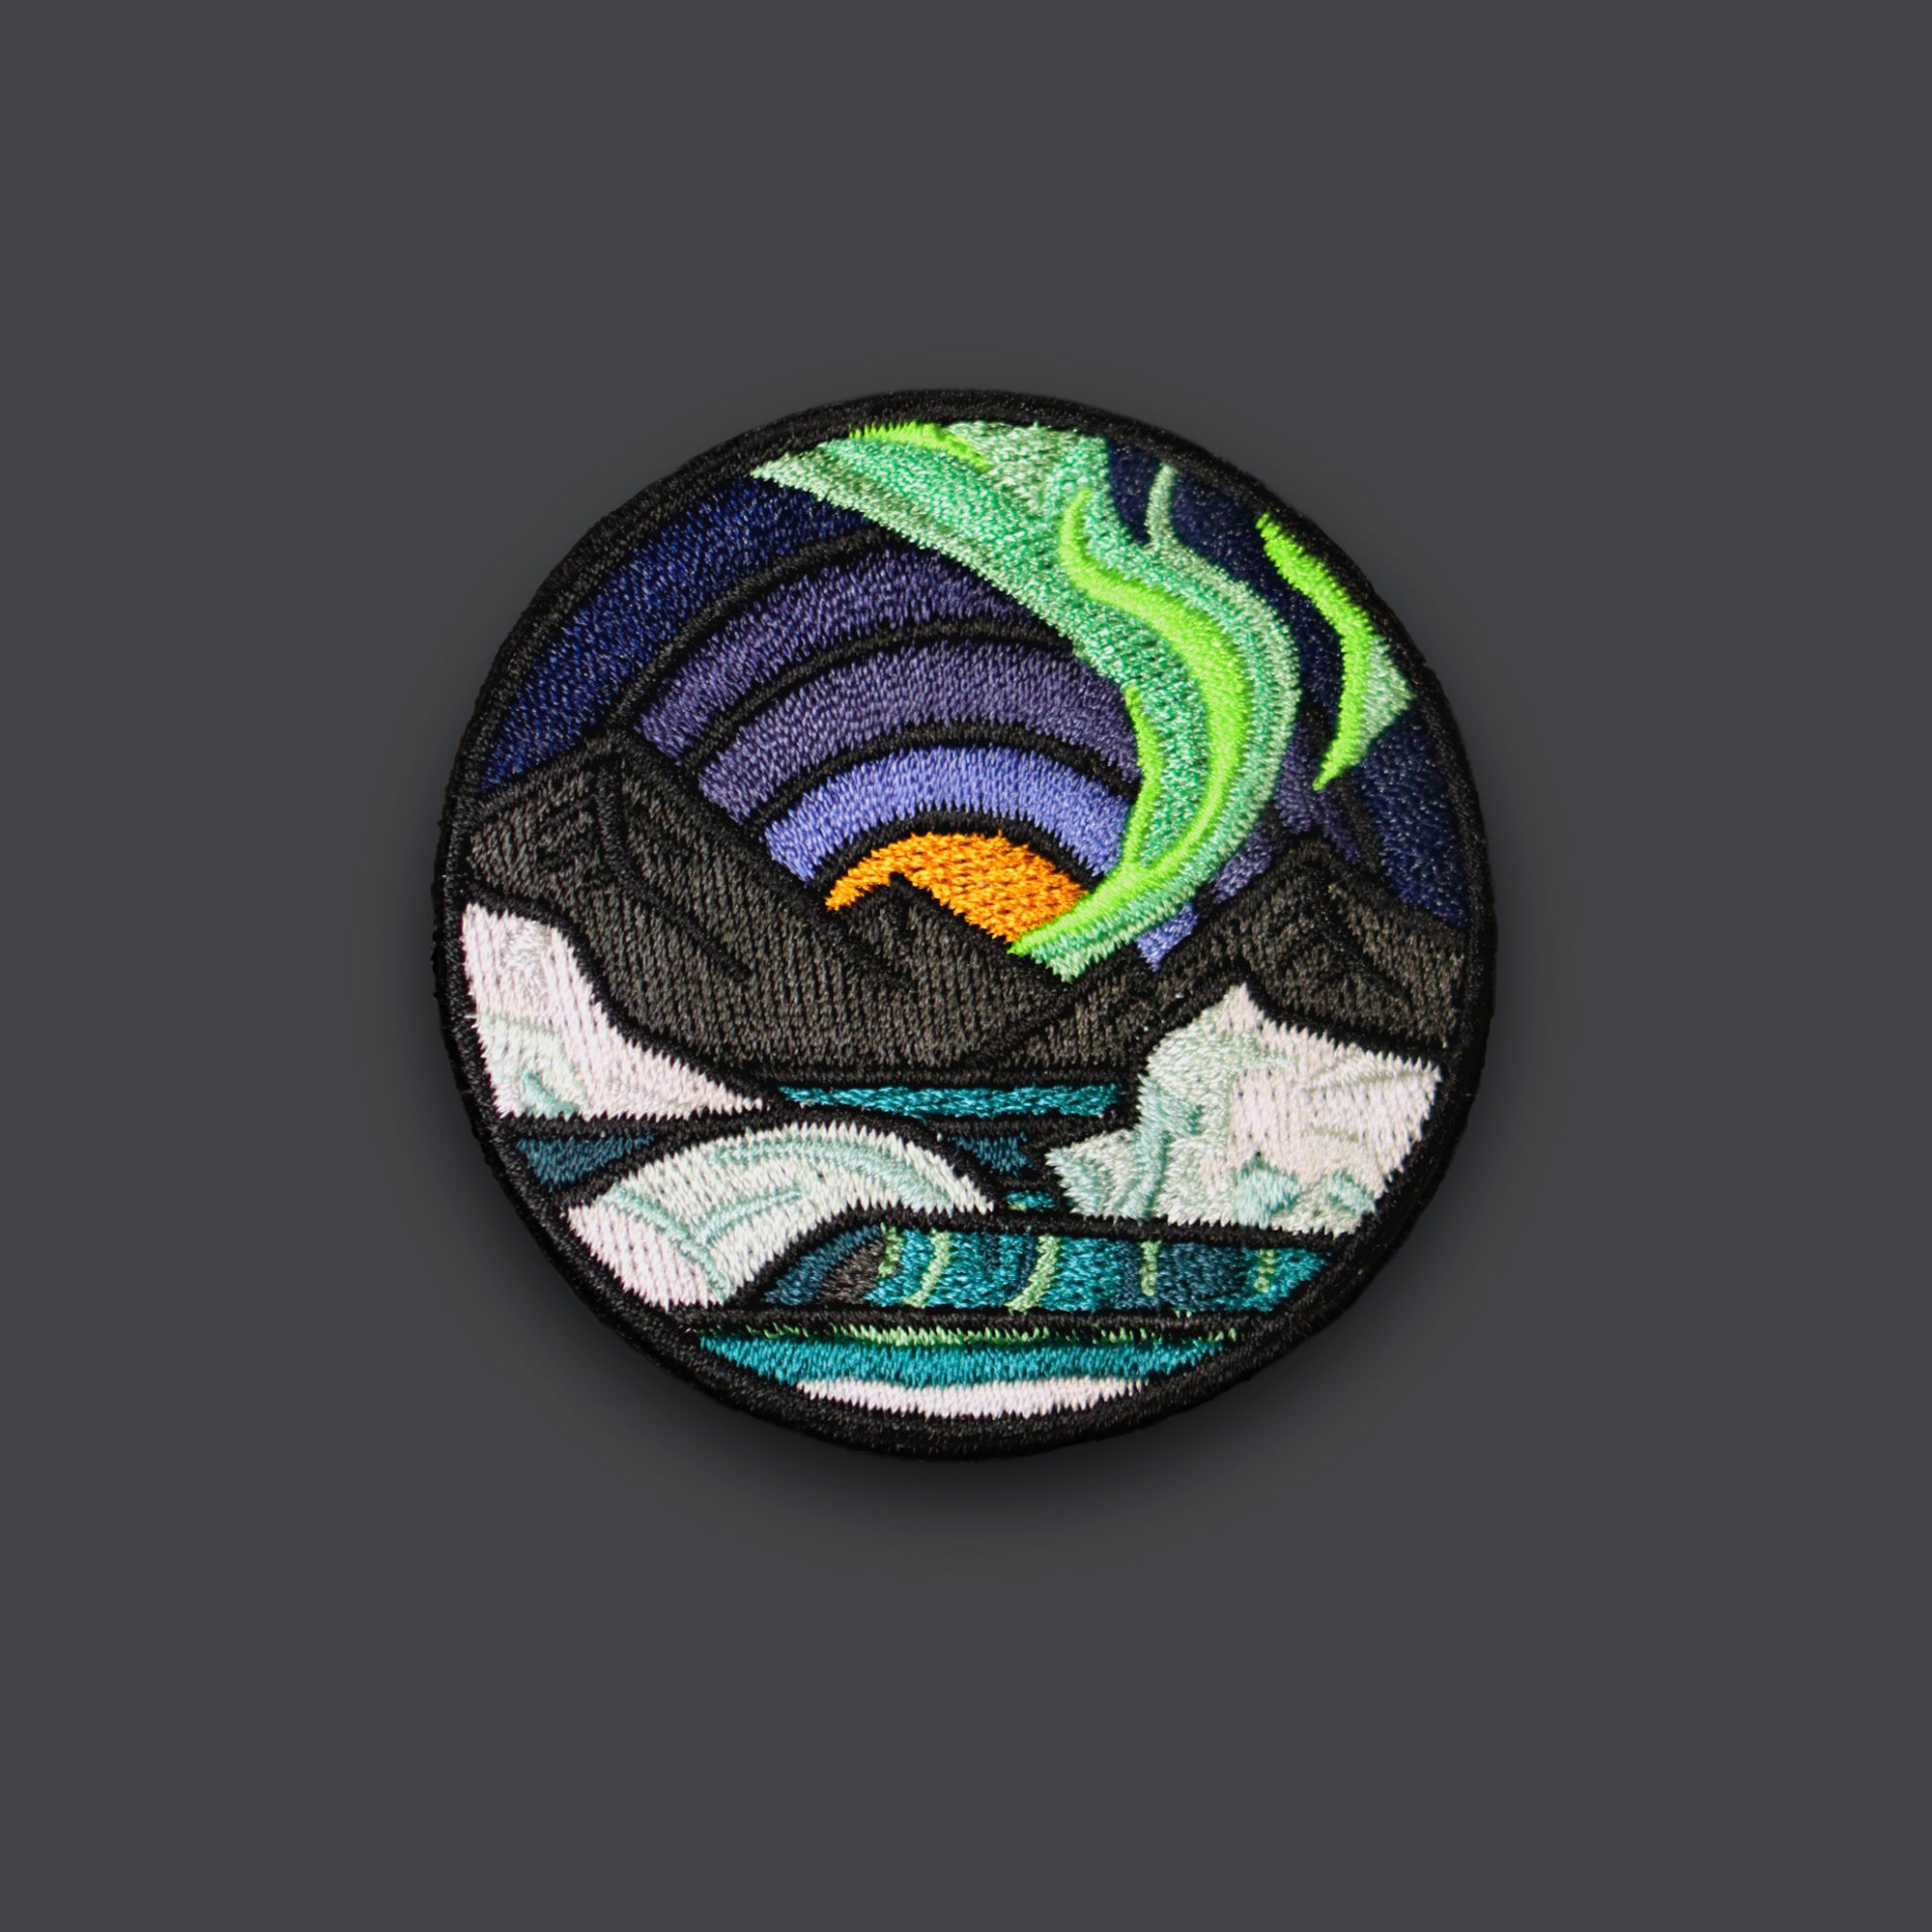 THE SIMPLE LIFE V4 "NORTHERN LIGHTS" Aurora Borealis Morale Patch